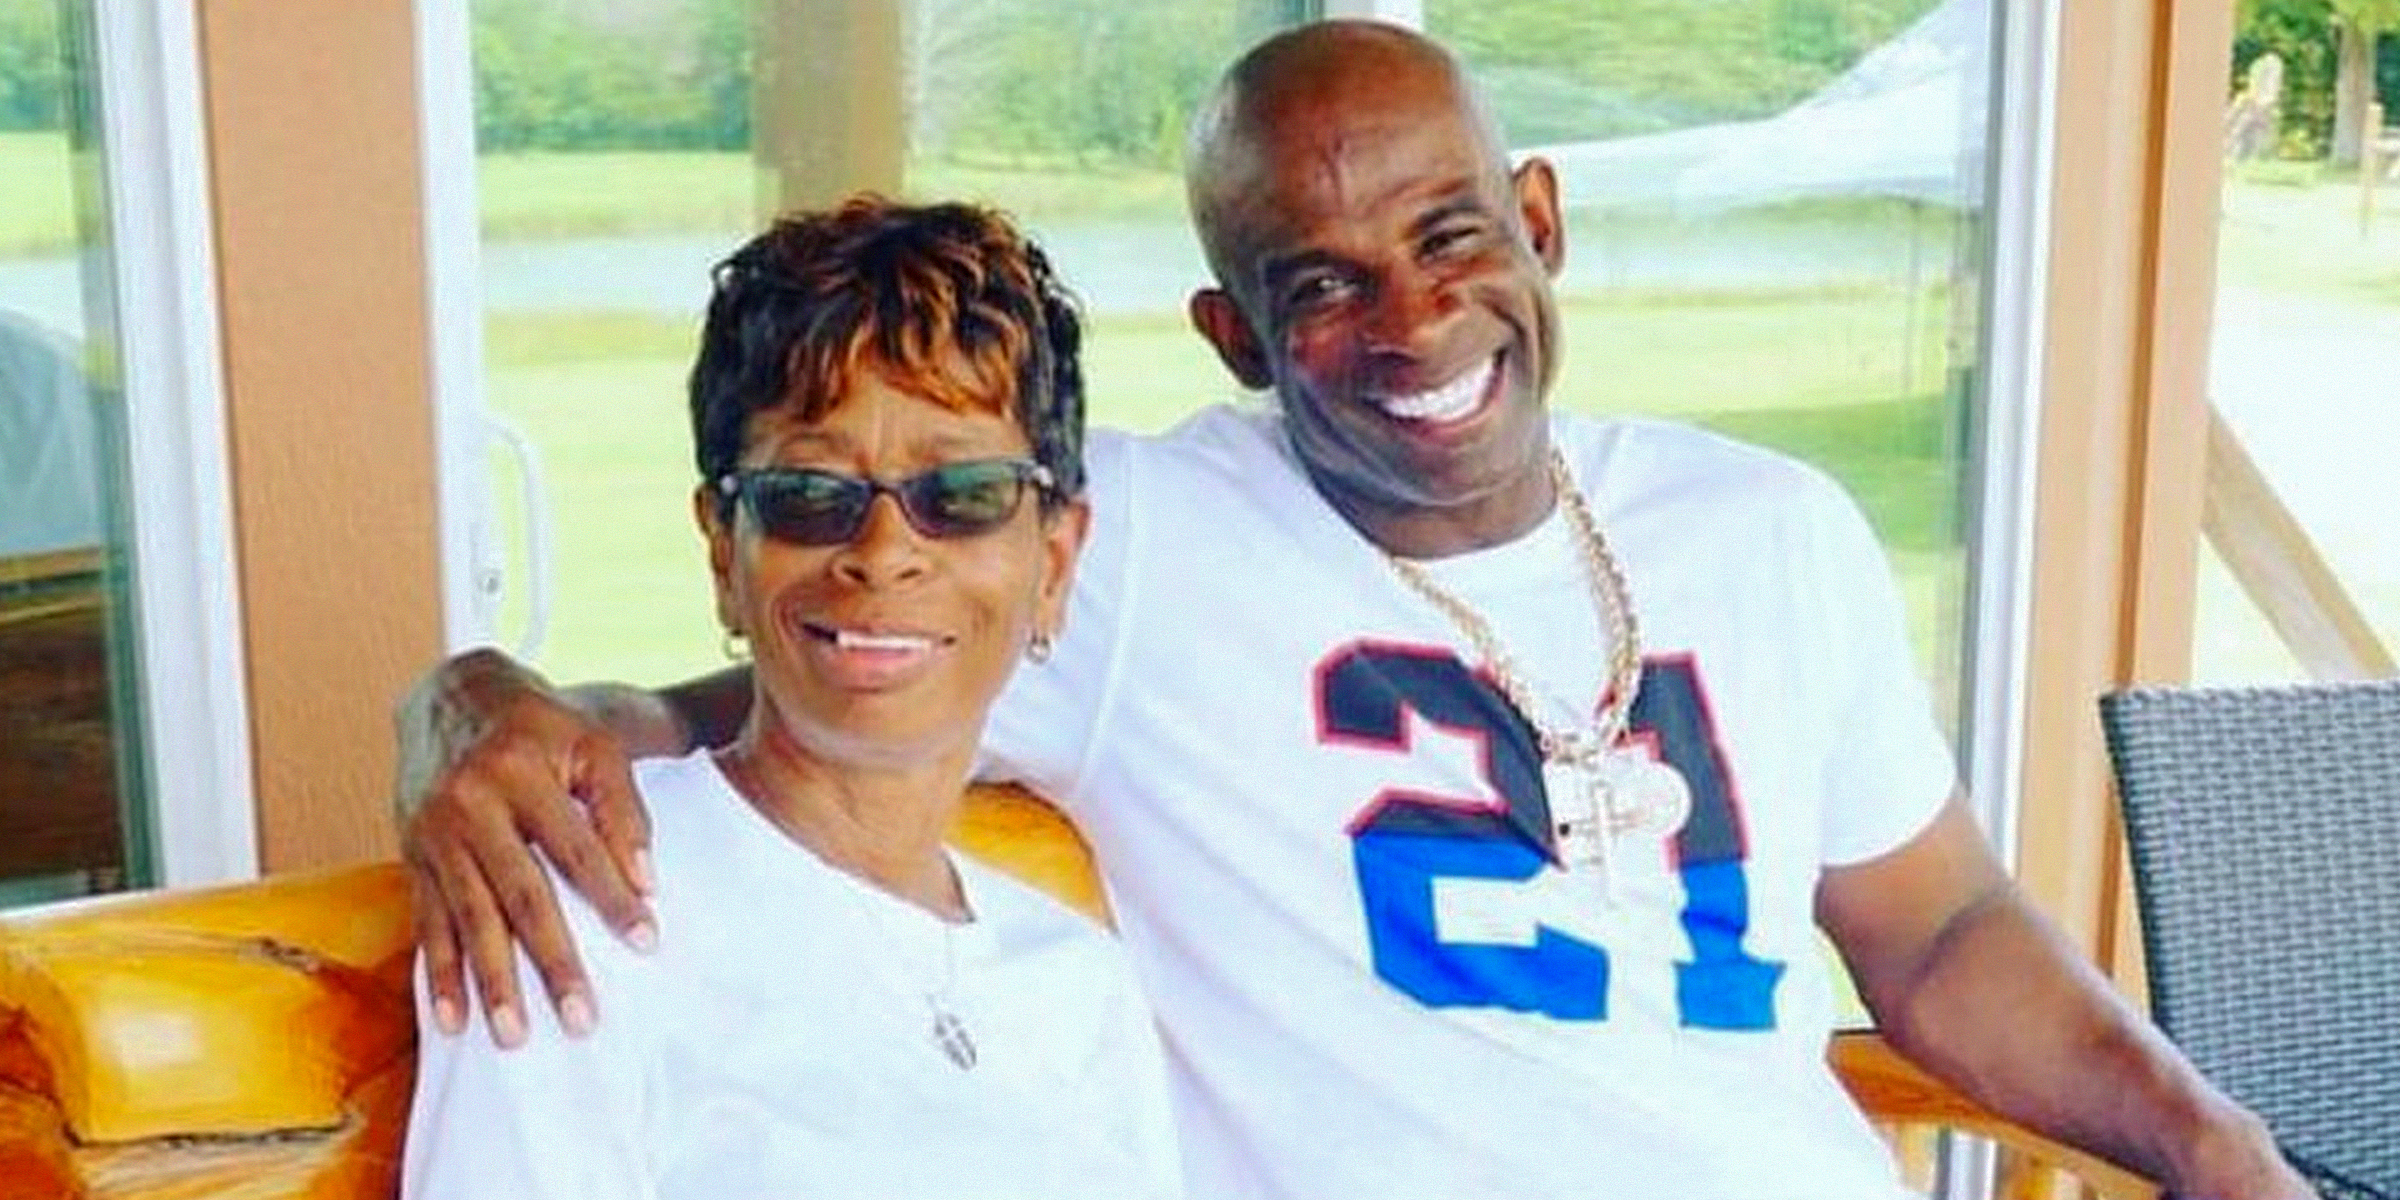 Connie Knight and Deion Sanders | Source: Instagram/mommaconnie21